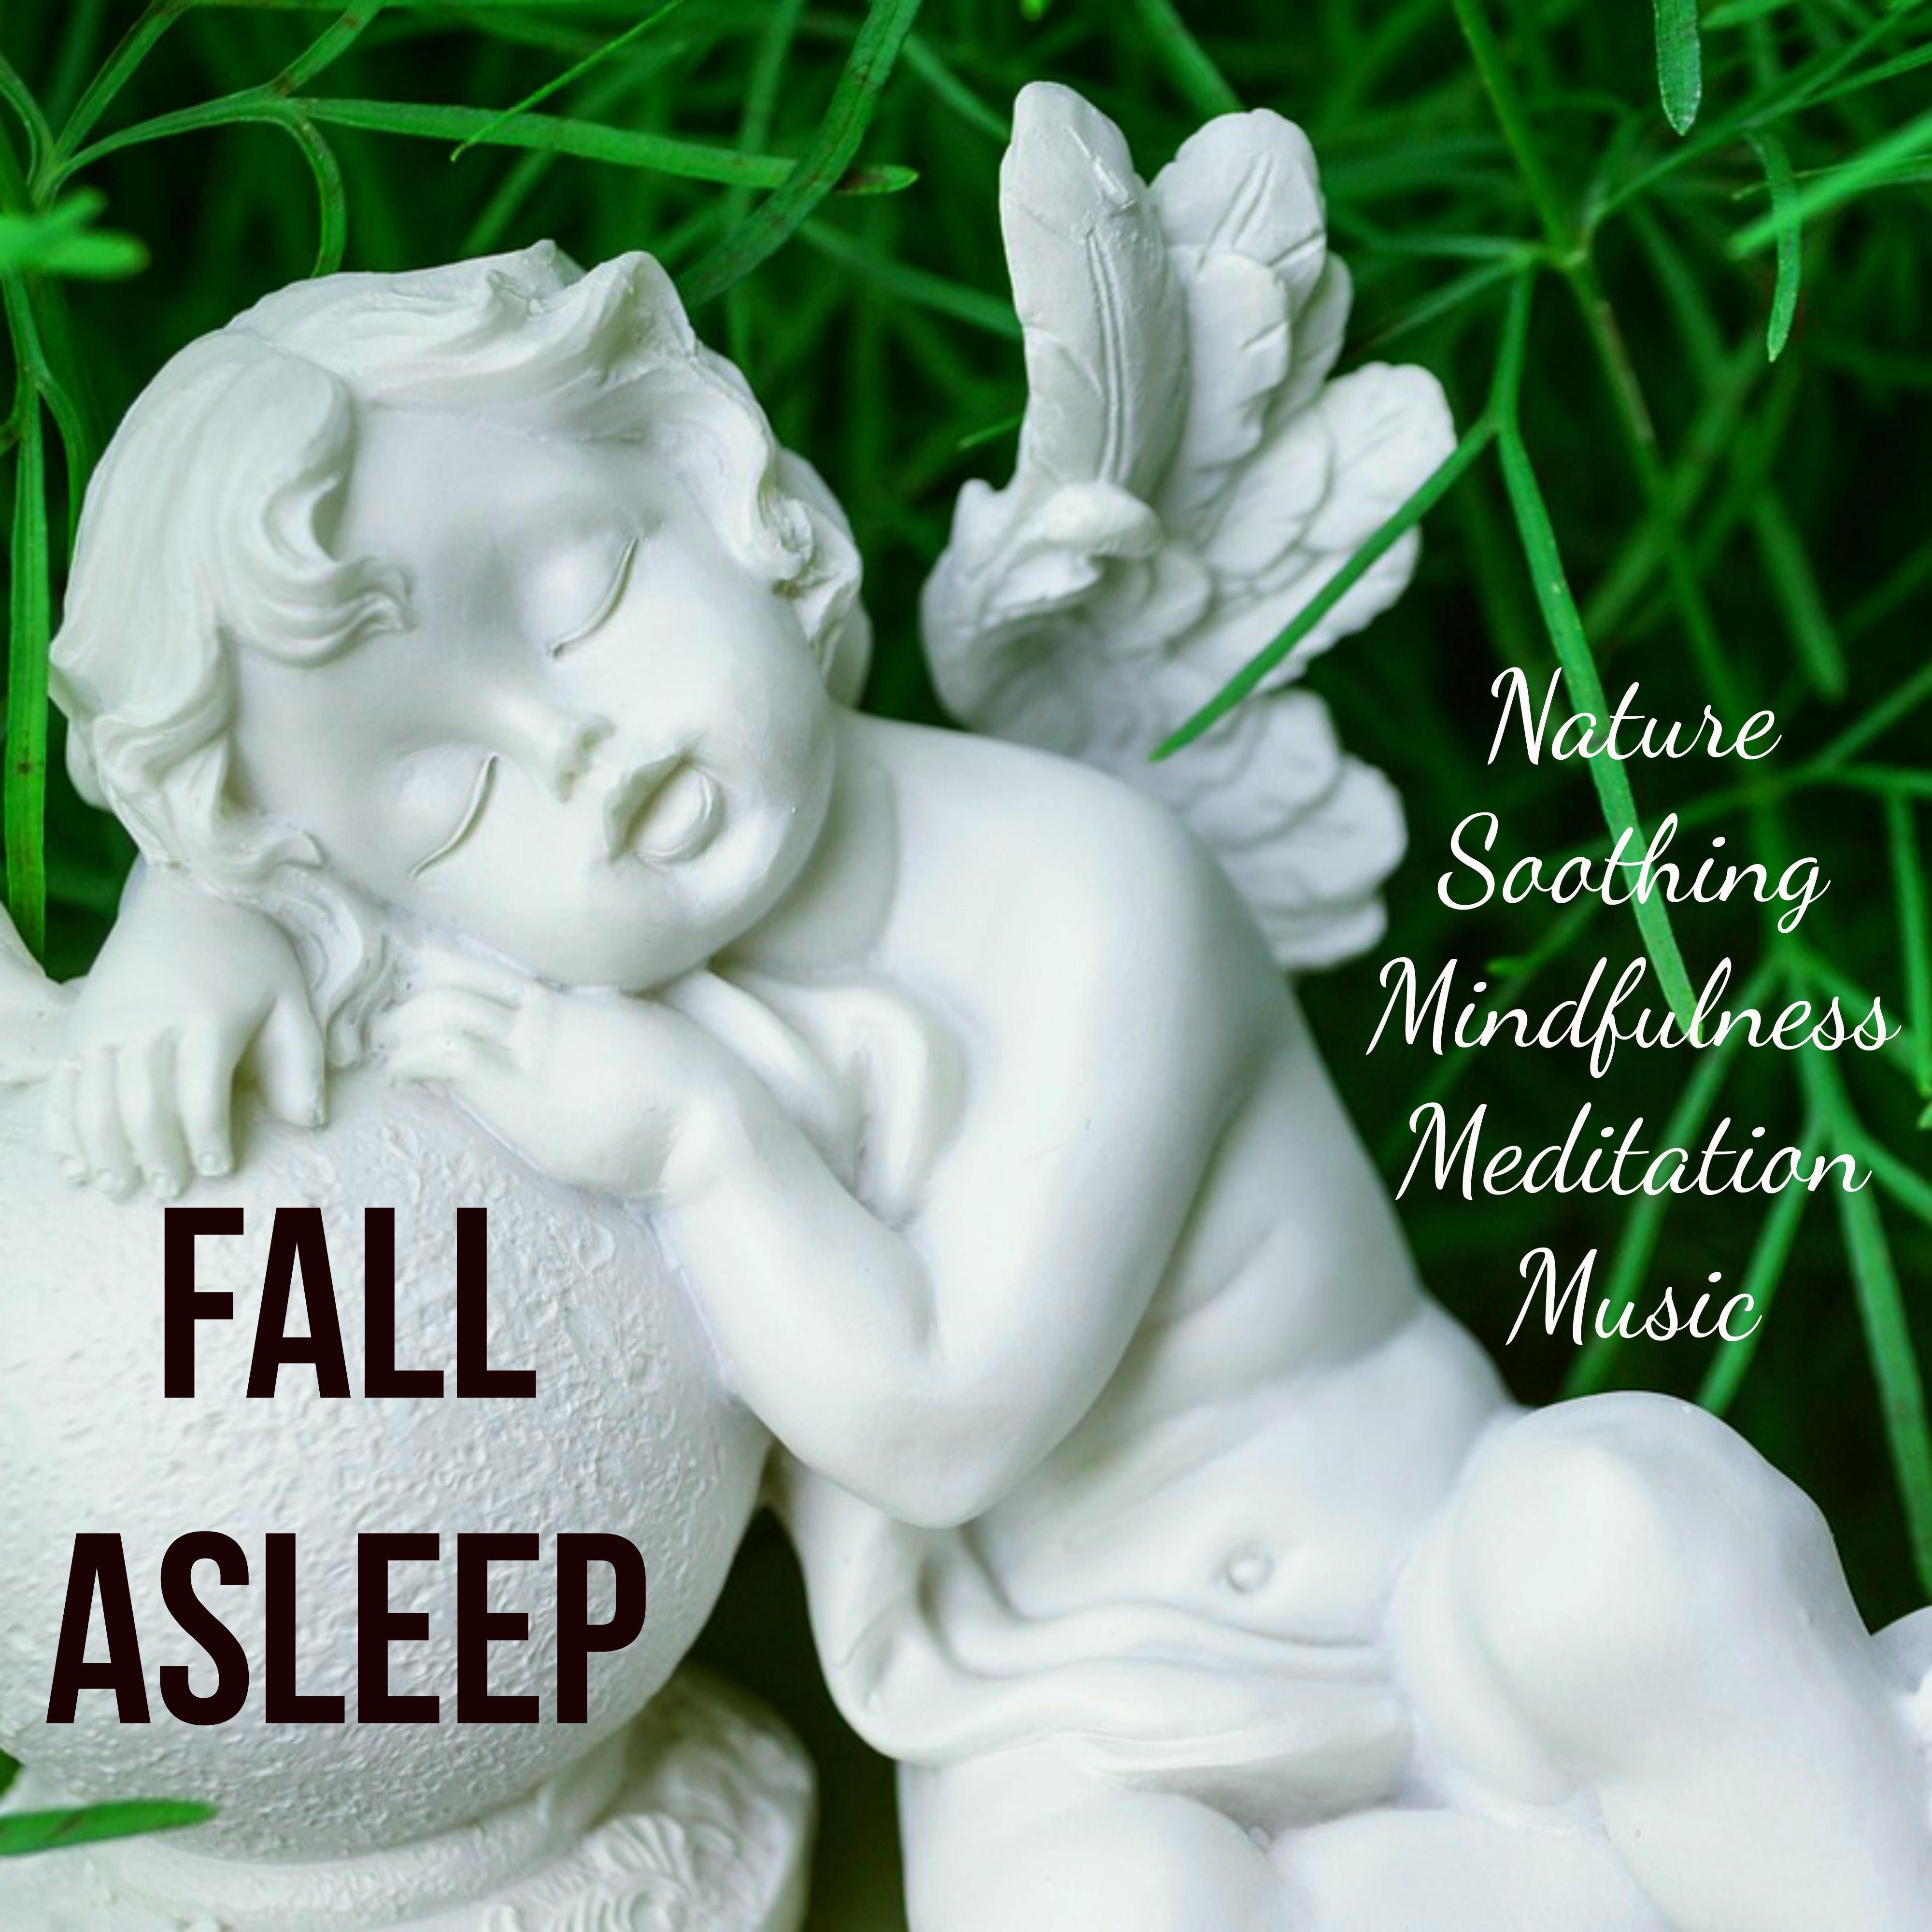 Fall Asleep - Nature Soothing Mindfulness Meditation Music for Dream Cycle Relax Time and Healthy Body with Instrumental Nature Healing Sounds